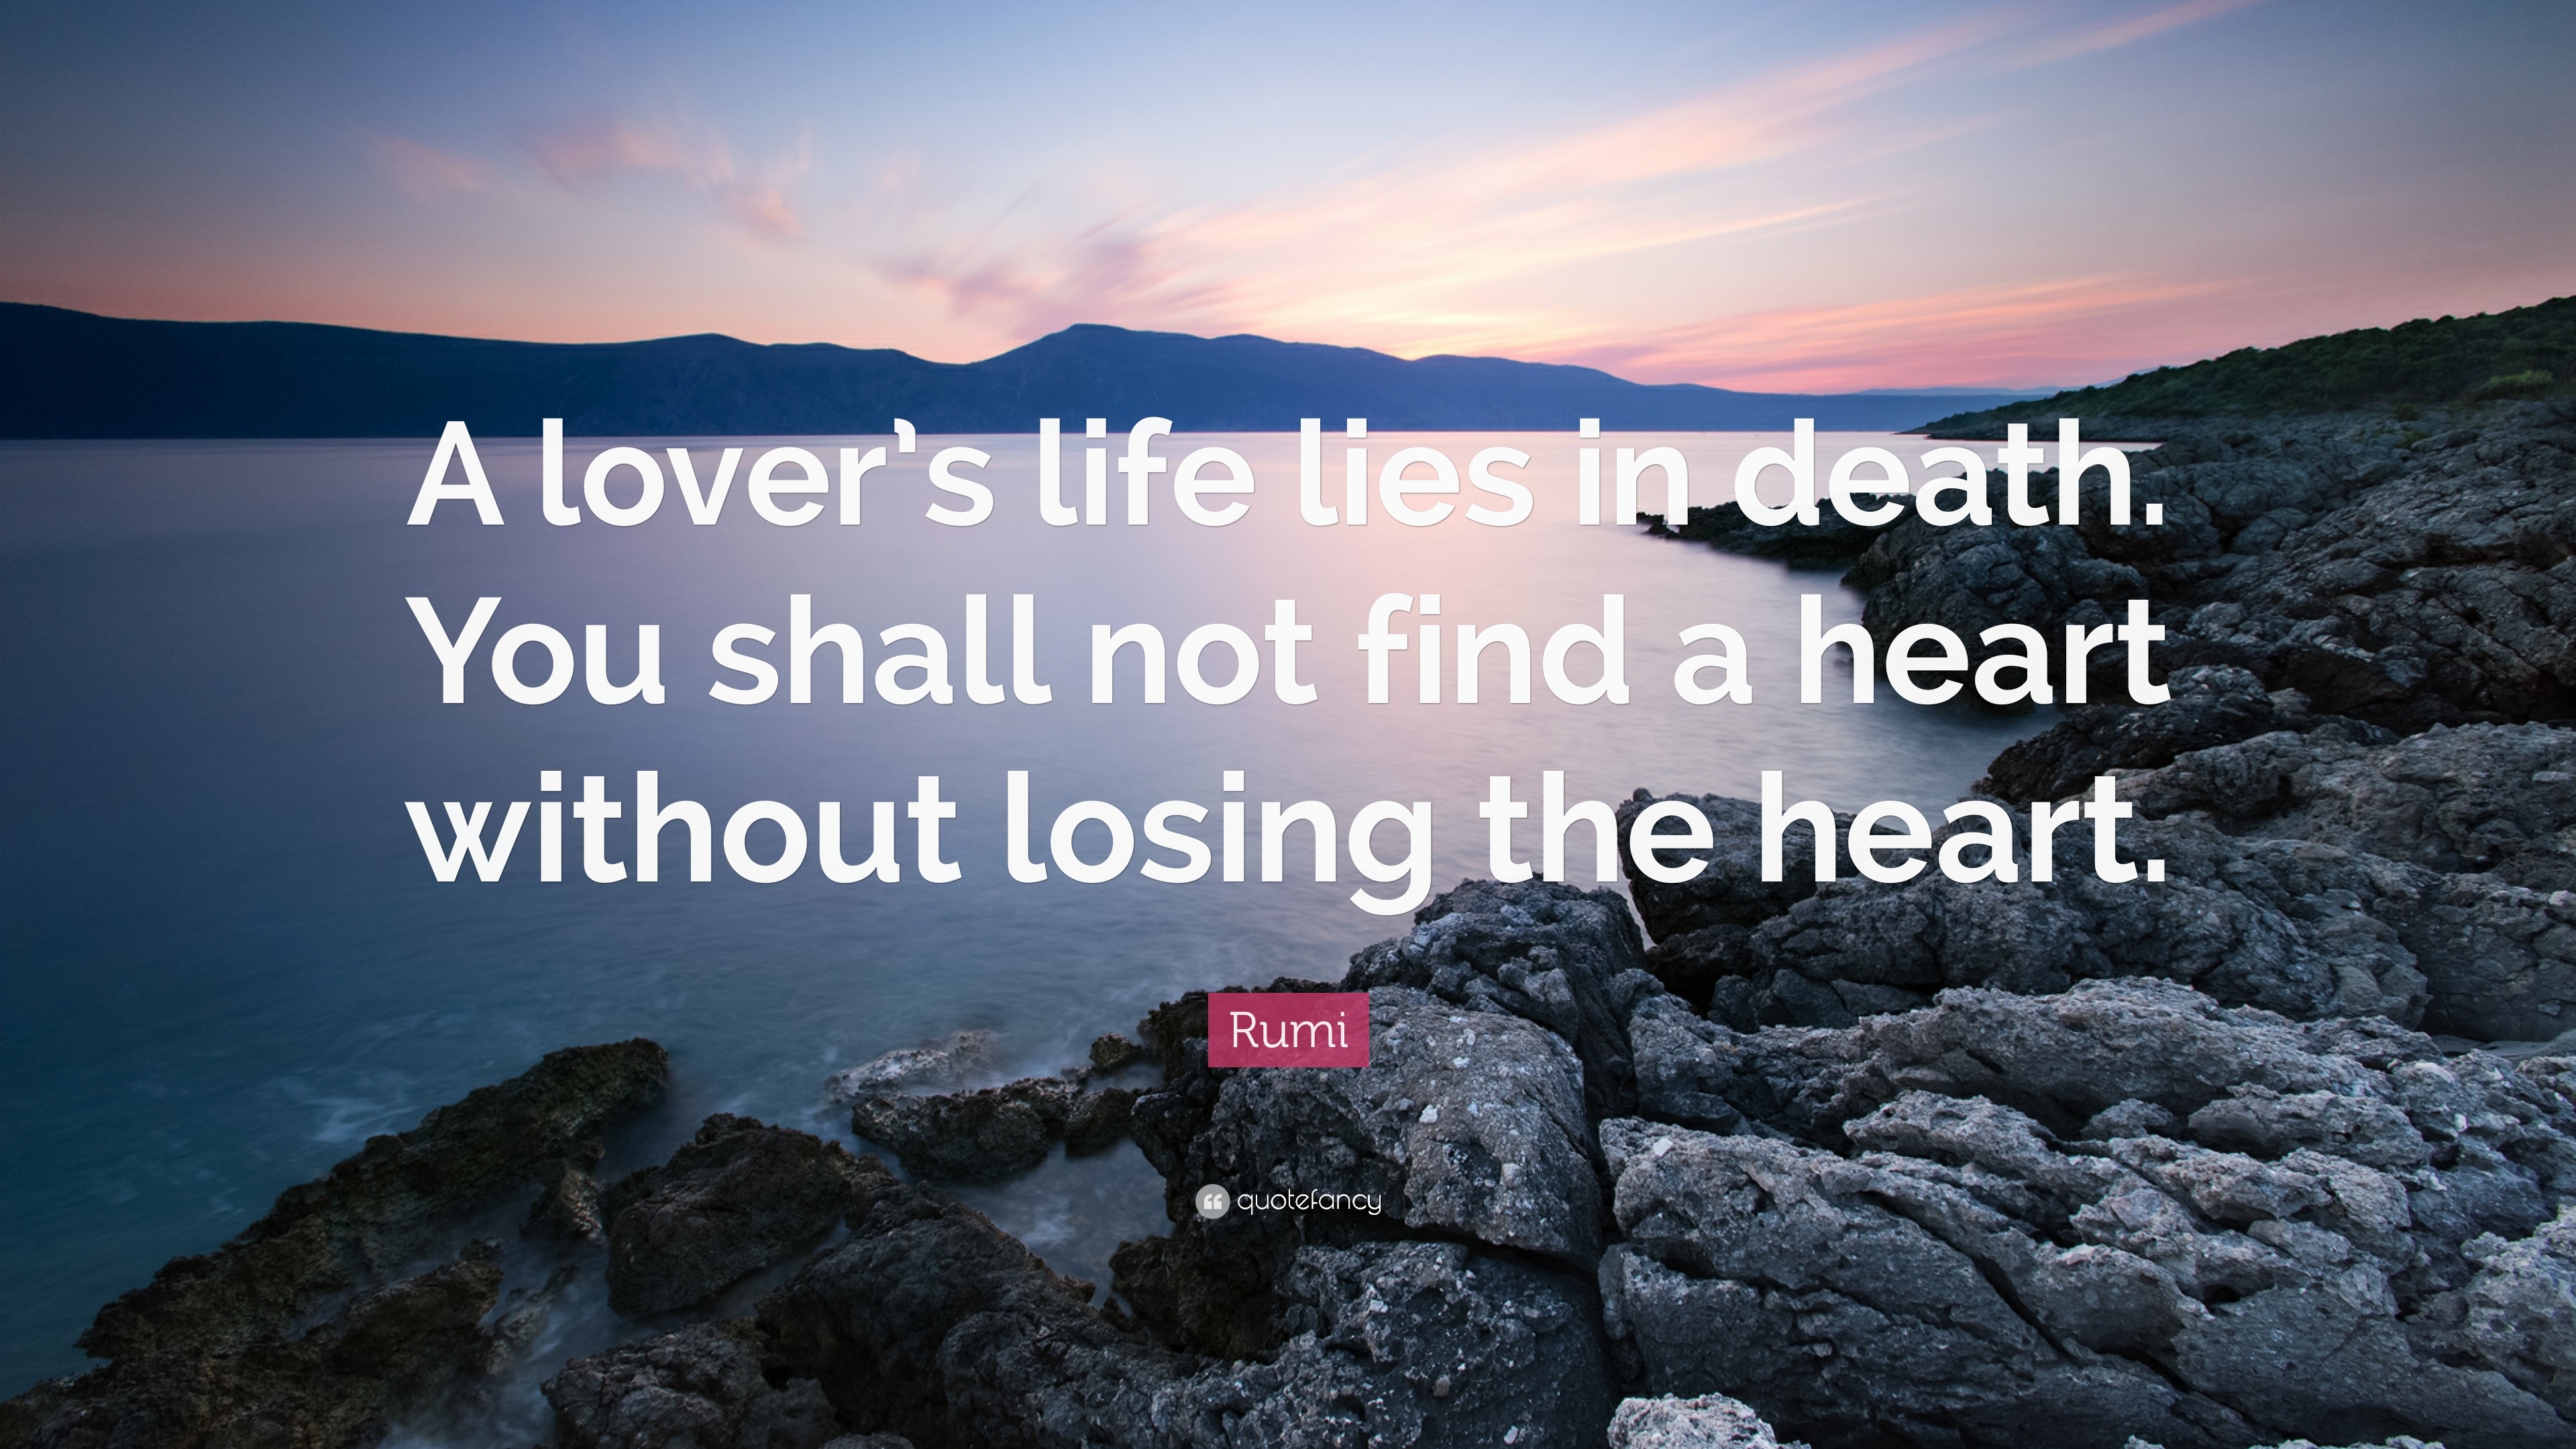 Rumi Quote: “A lover’s life lies in death. You shall not find a heart